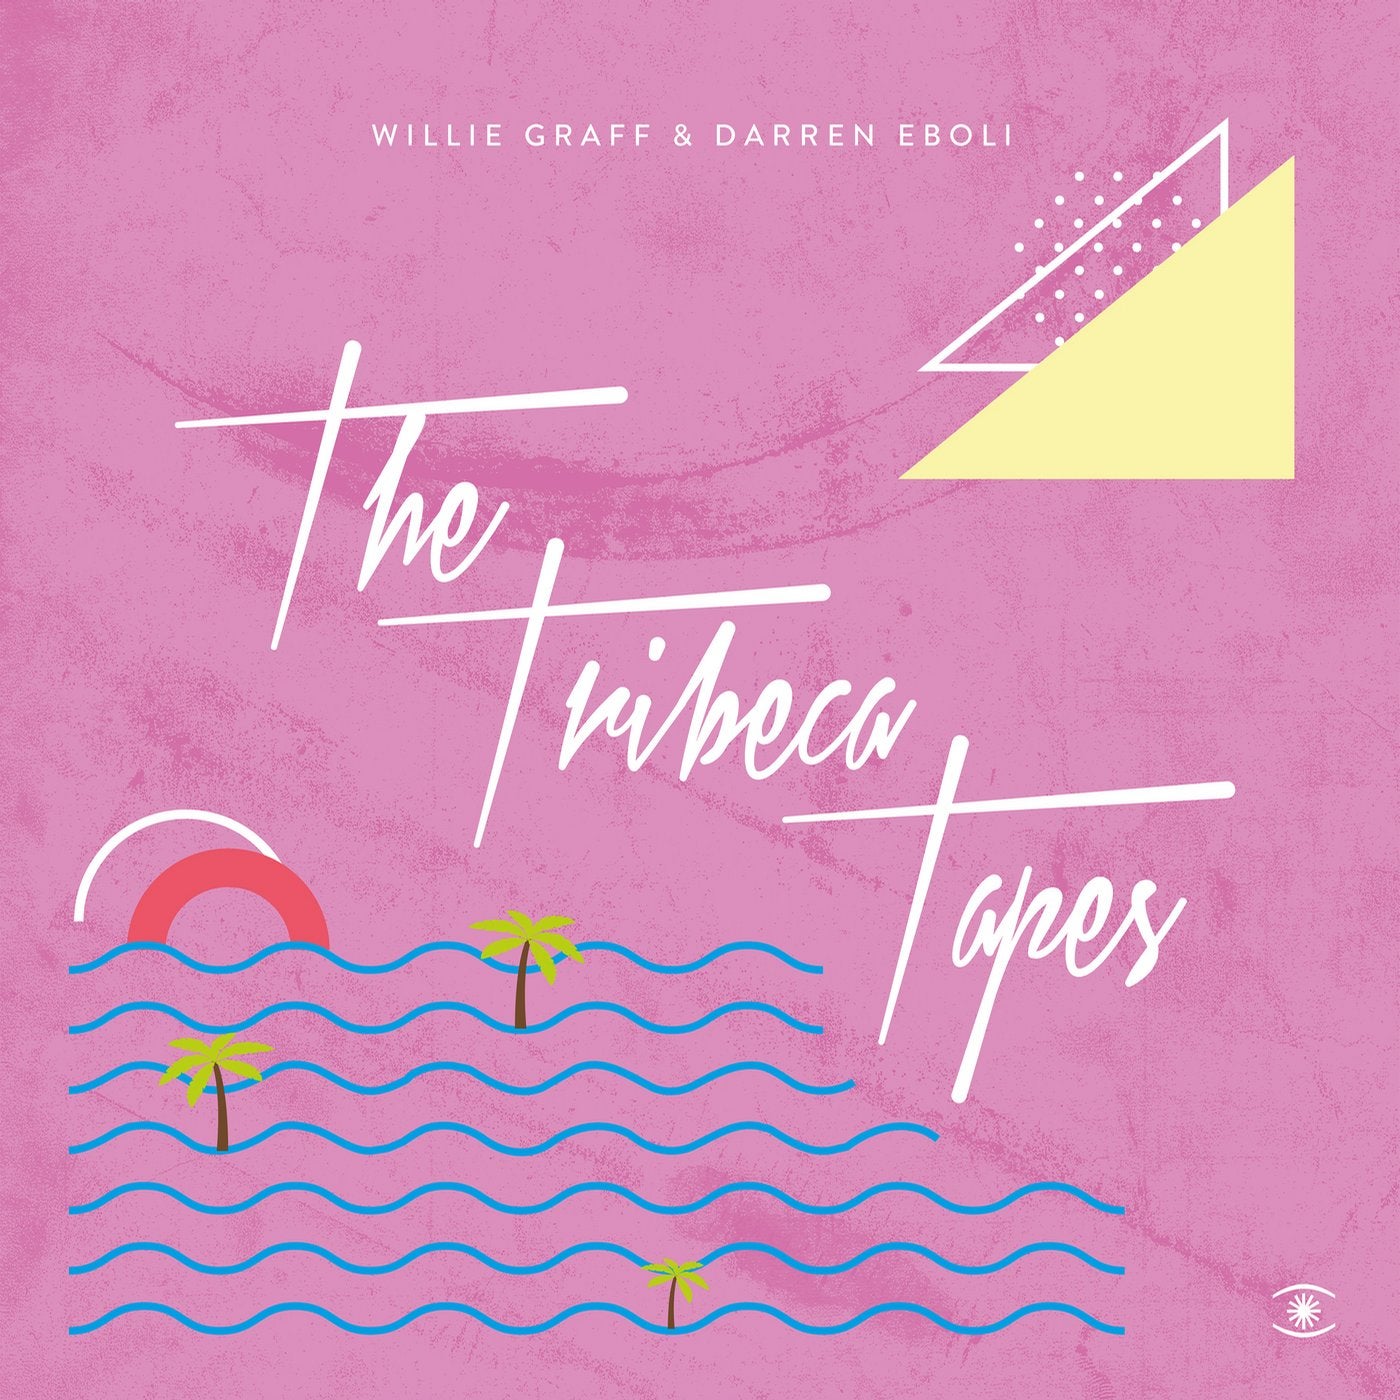 The Tribeca Tapes